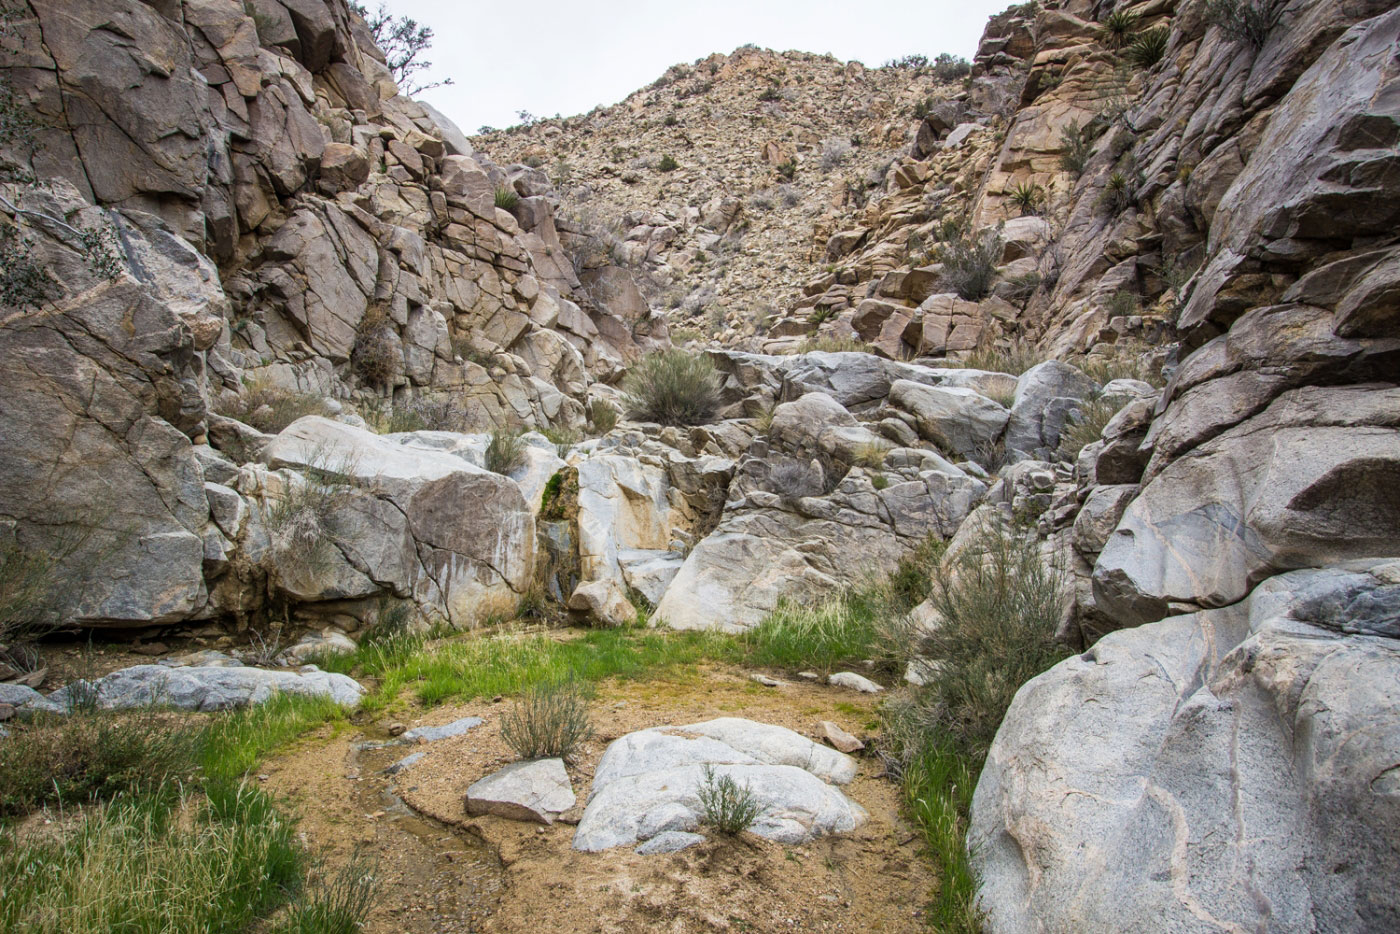 Hike Smith Water Canyon Loop in Joshua Tree National Park, California - Stav is Lost